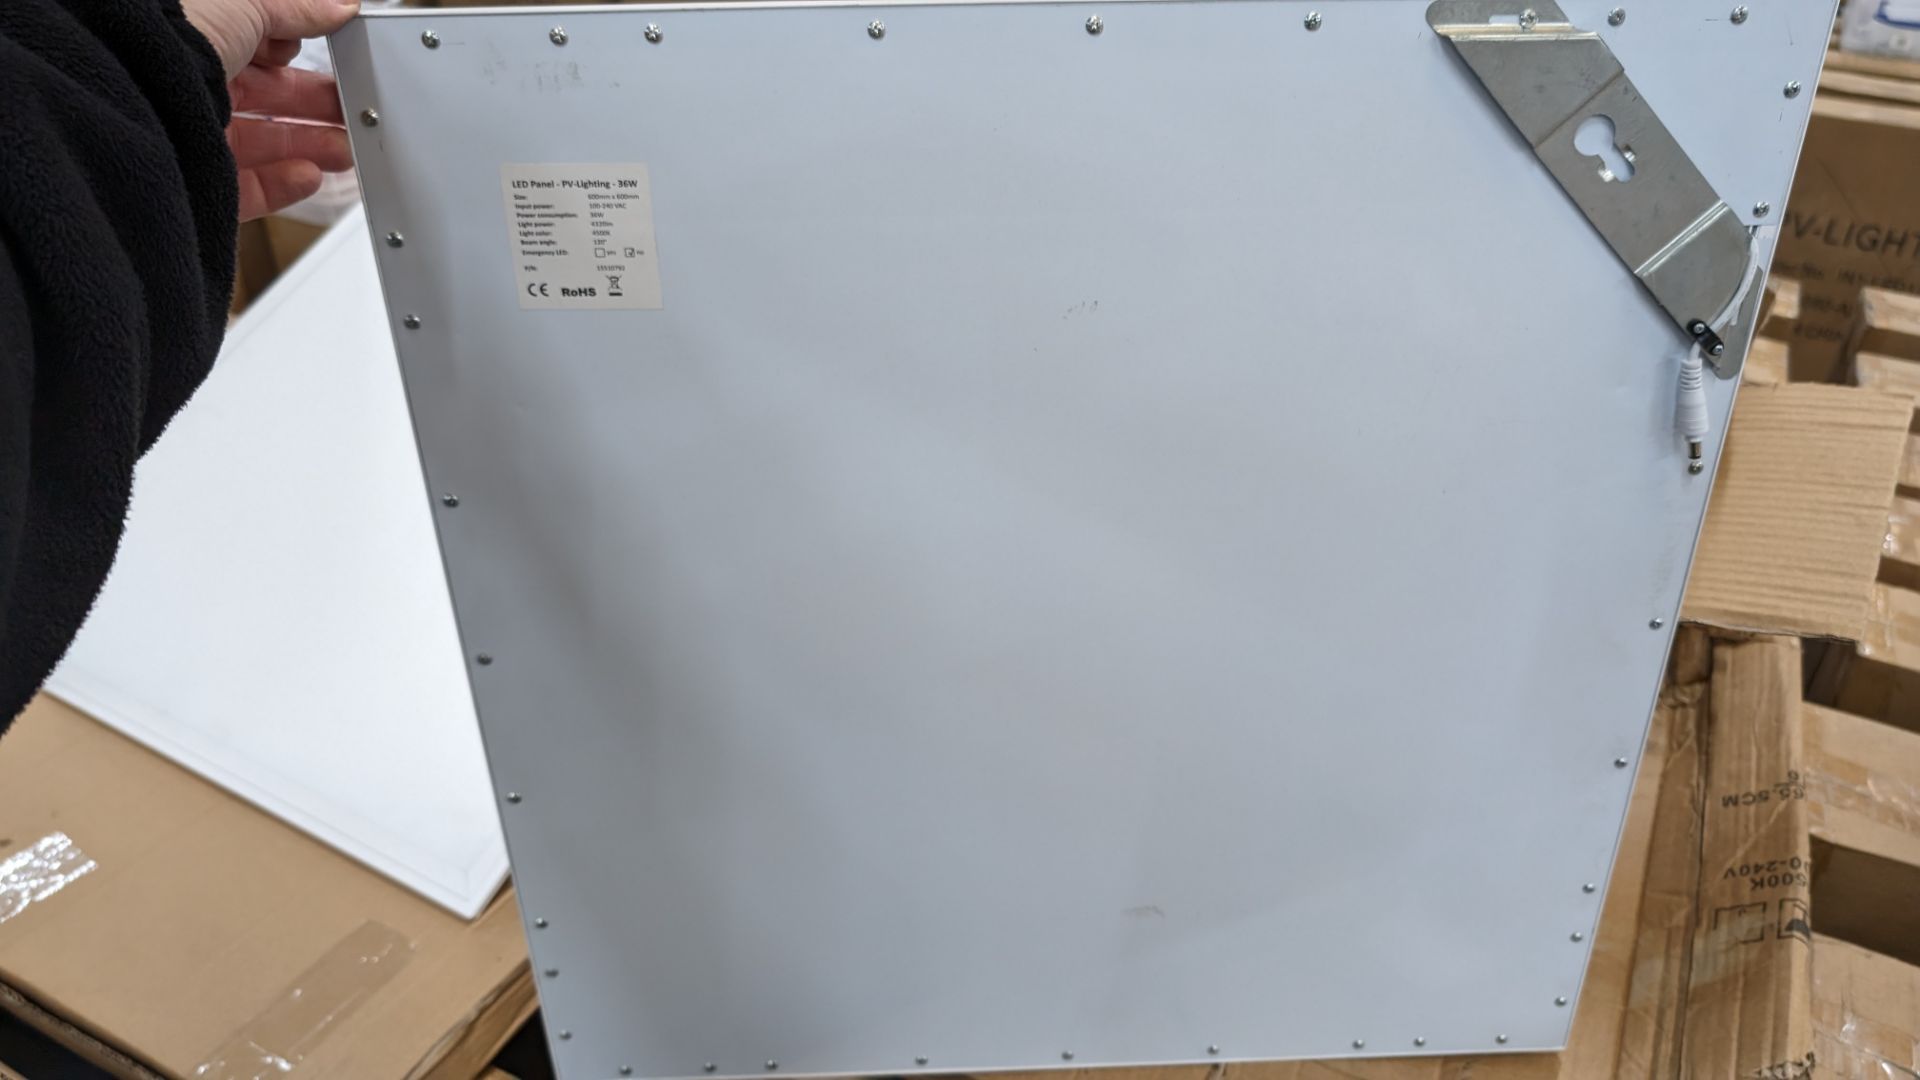 18 off 600mm x 600mm 36w 4500k 4320 lumens LED lighting panels. 36w drivers. This lot comprises 4 - Image 10 of 16